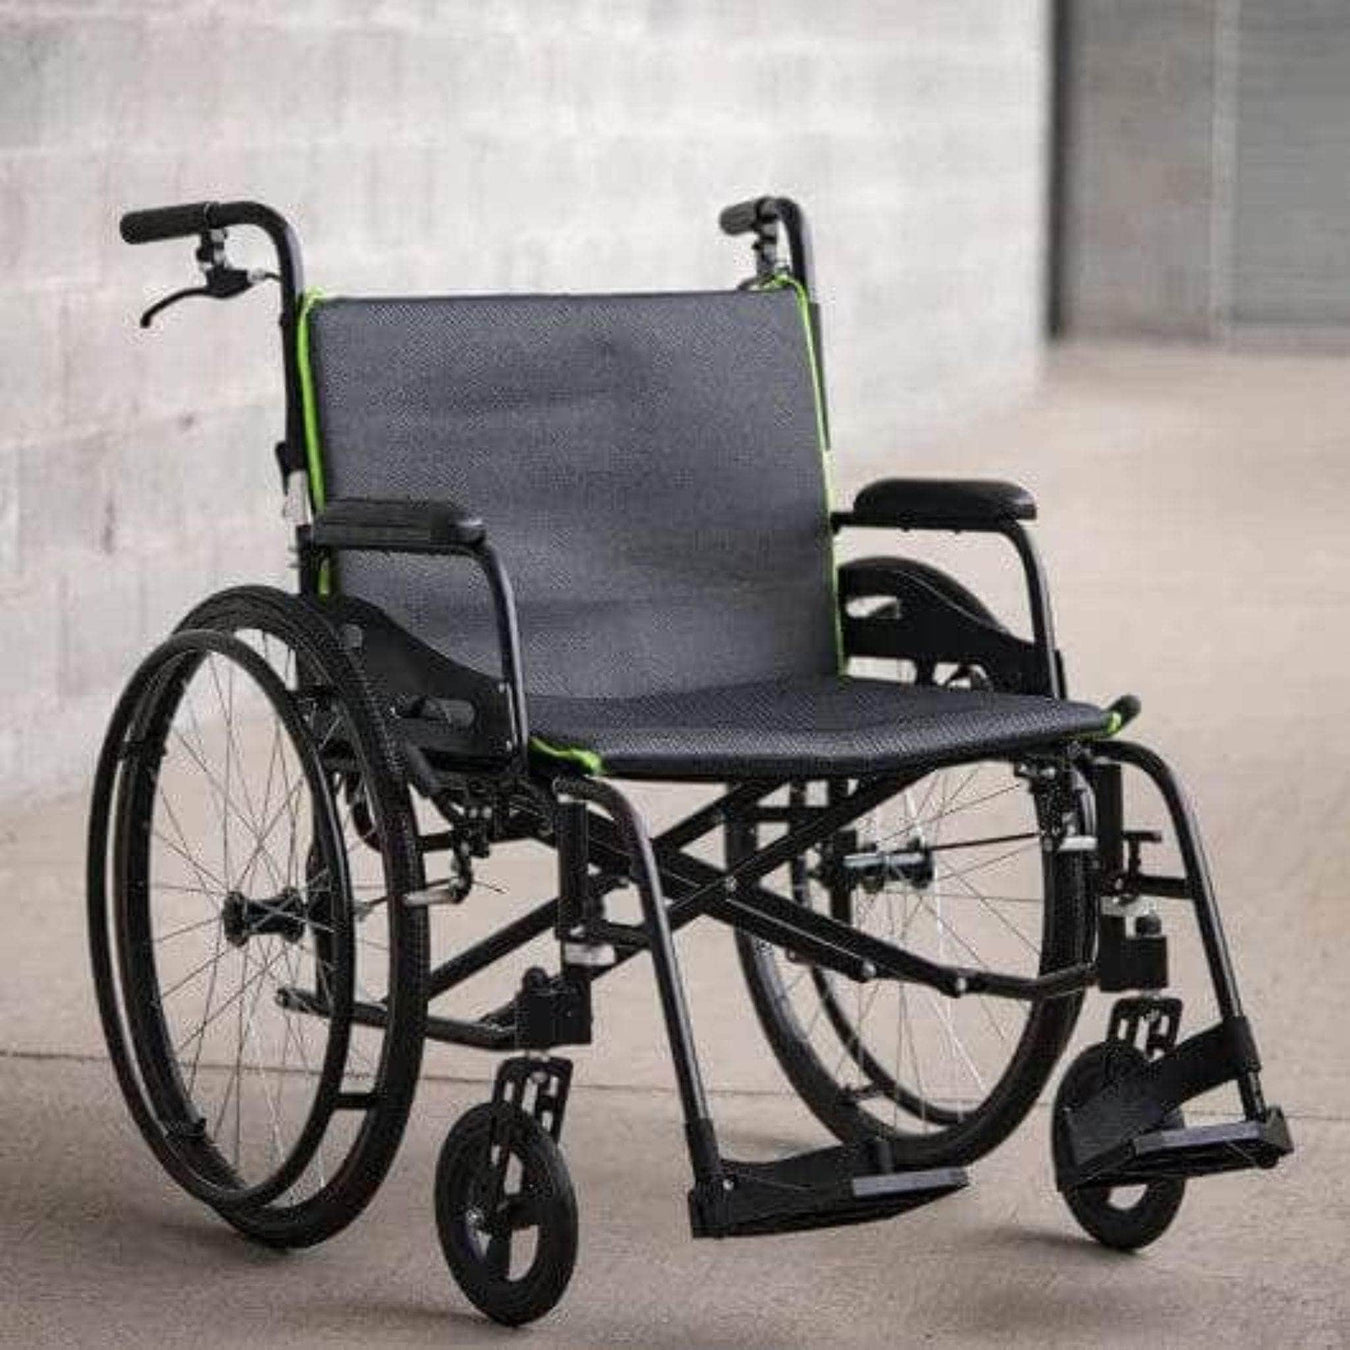 Affordable Wheelchairs